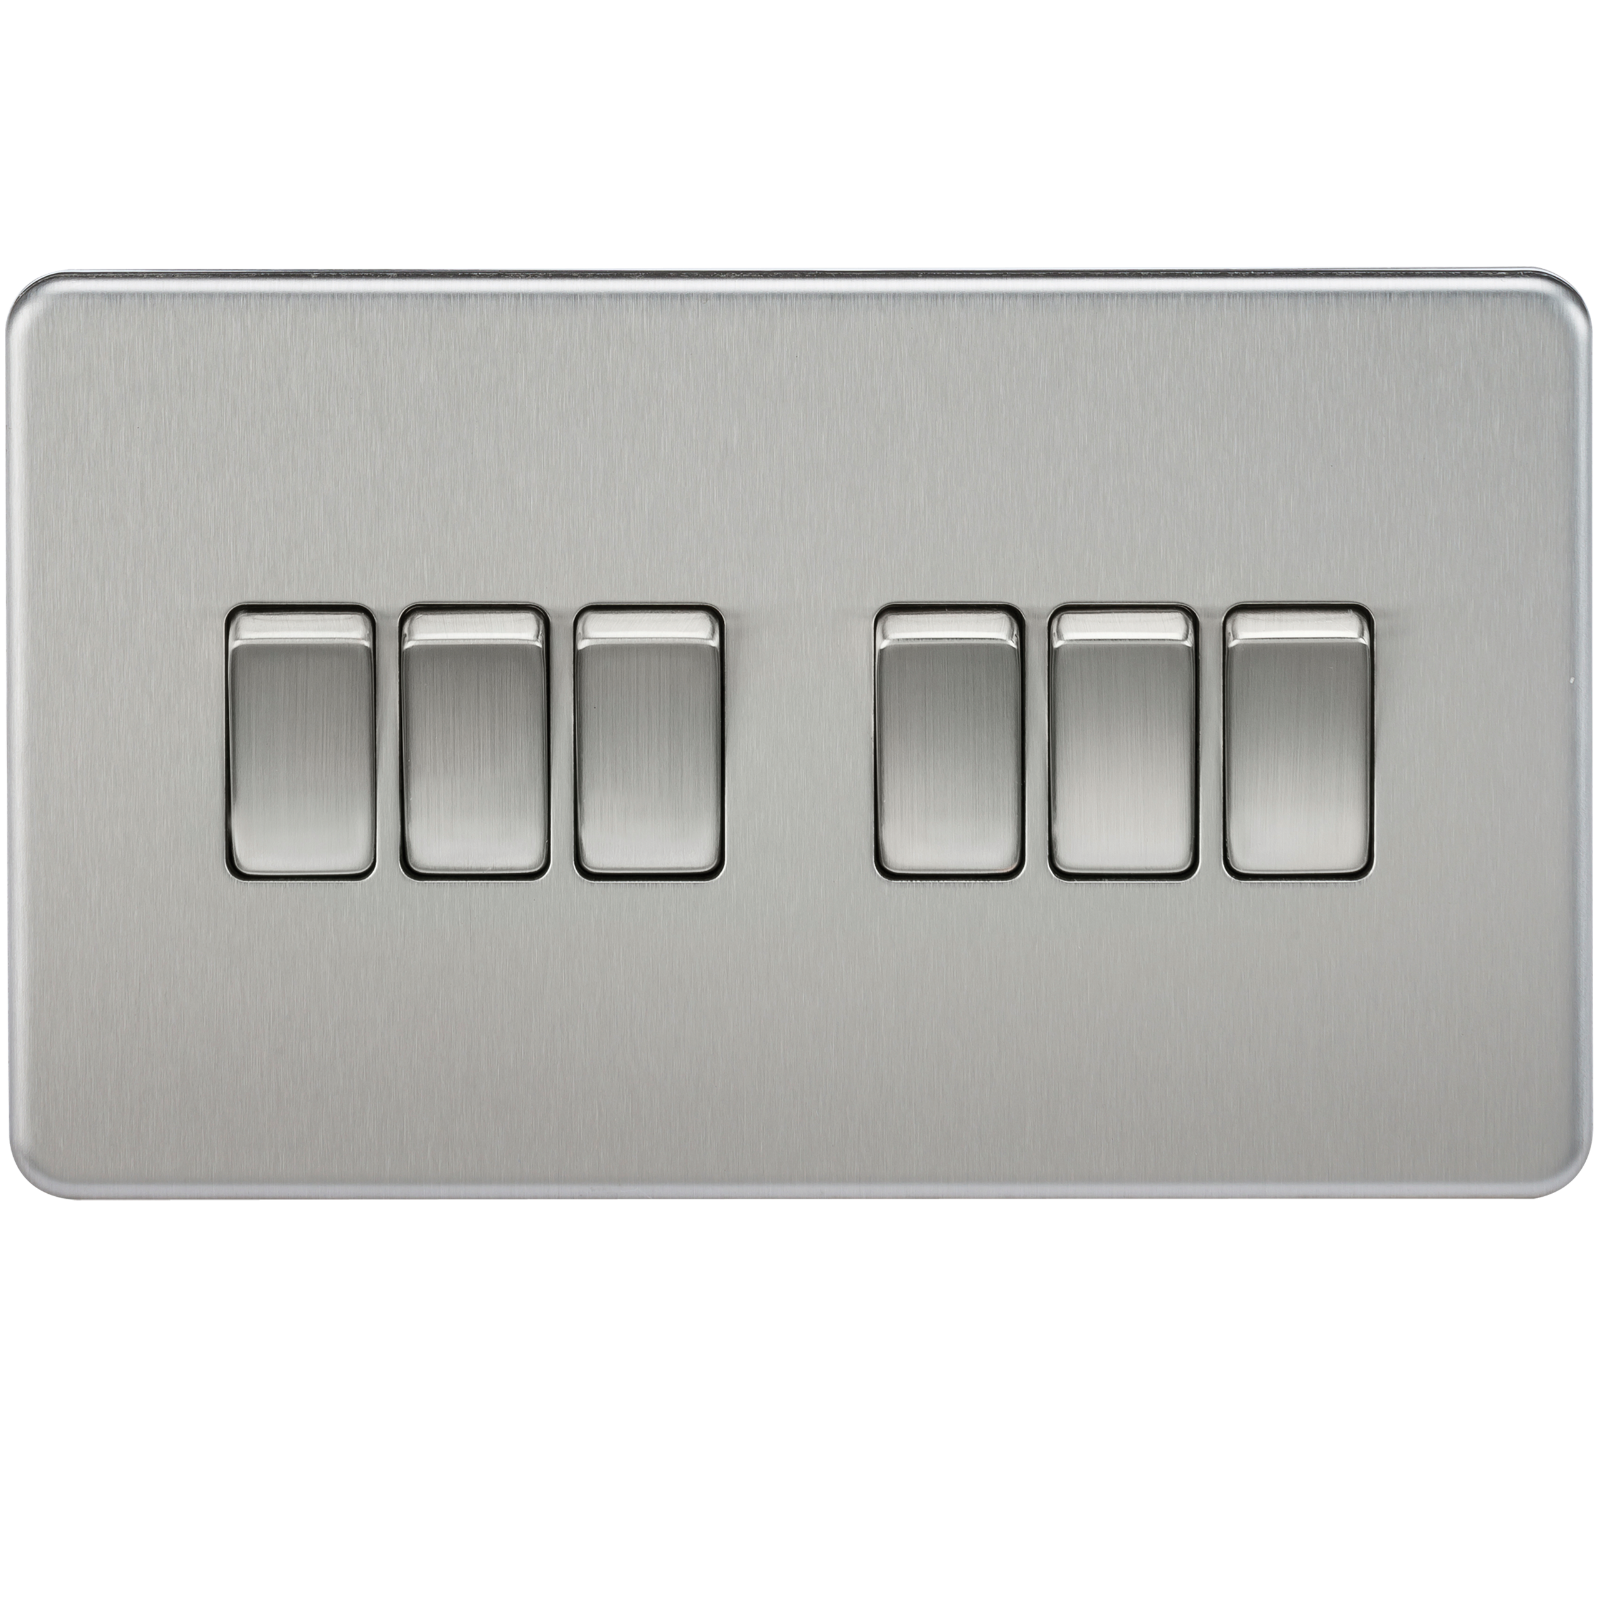 Screwless 10A 6G 2-way Switch - Brushed Chrome - SF4200BC 